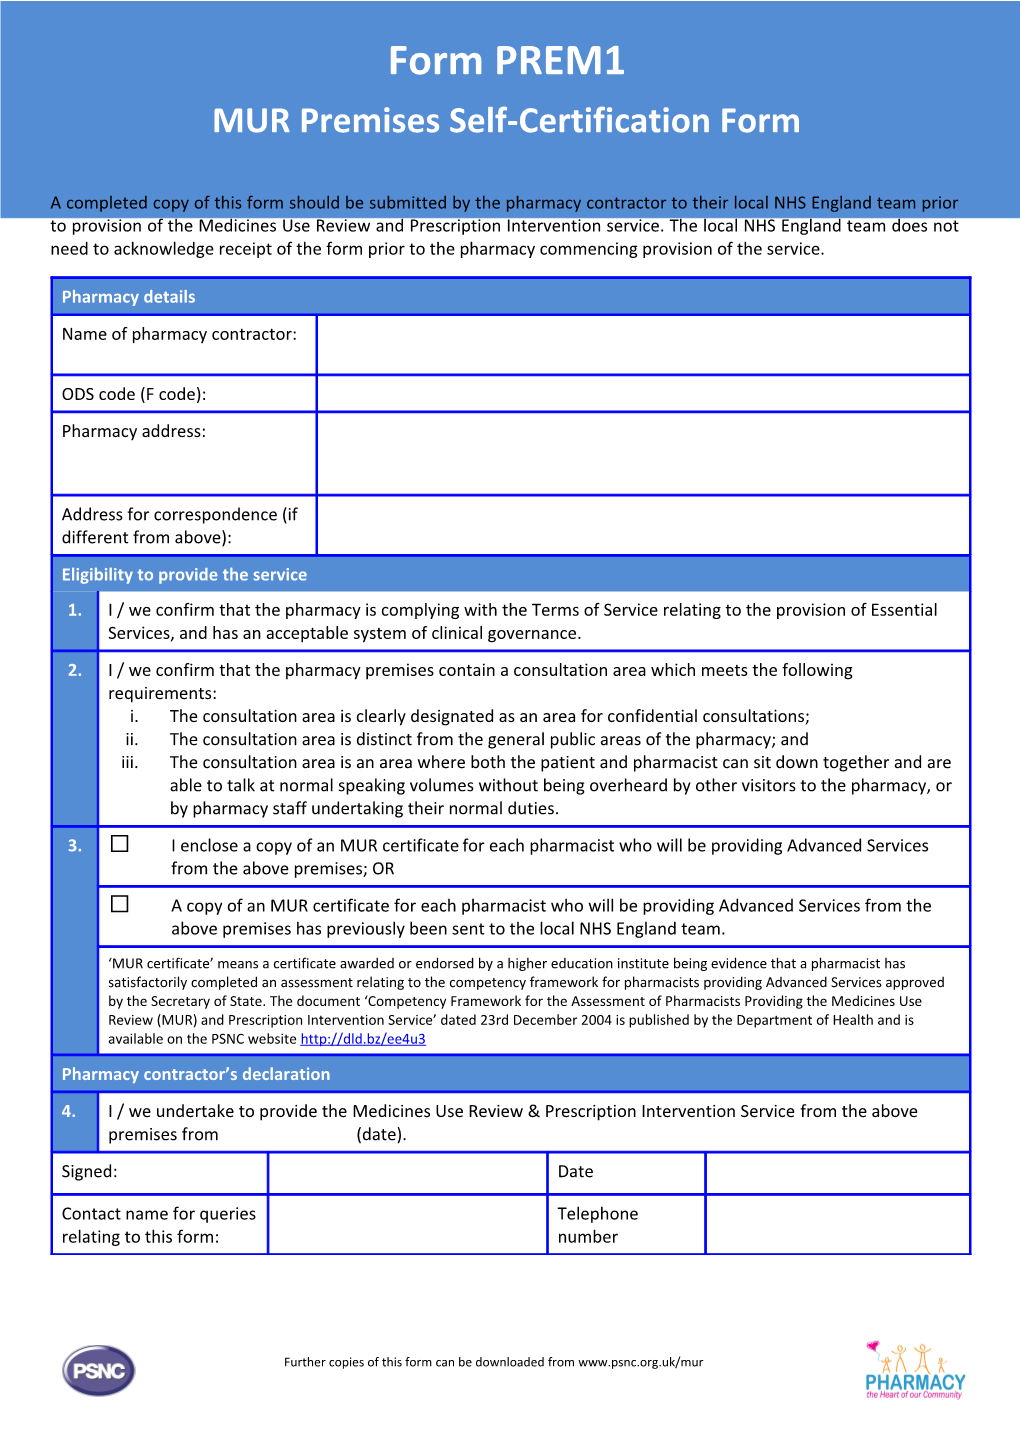 A Completed Copy of This Form Should Be Submitted by the Pharmacy Contractor to Their Local